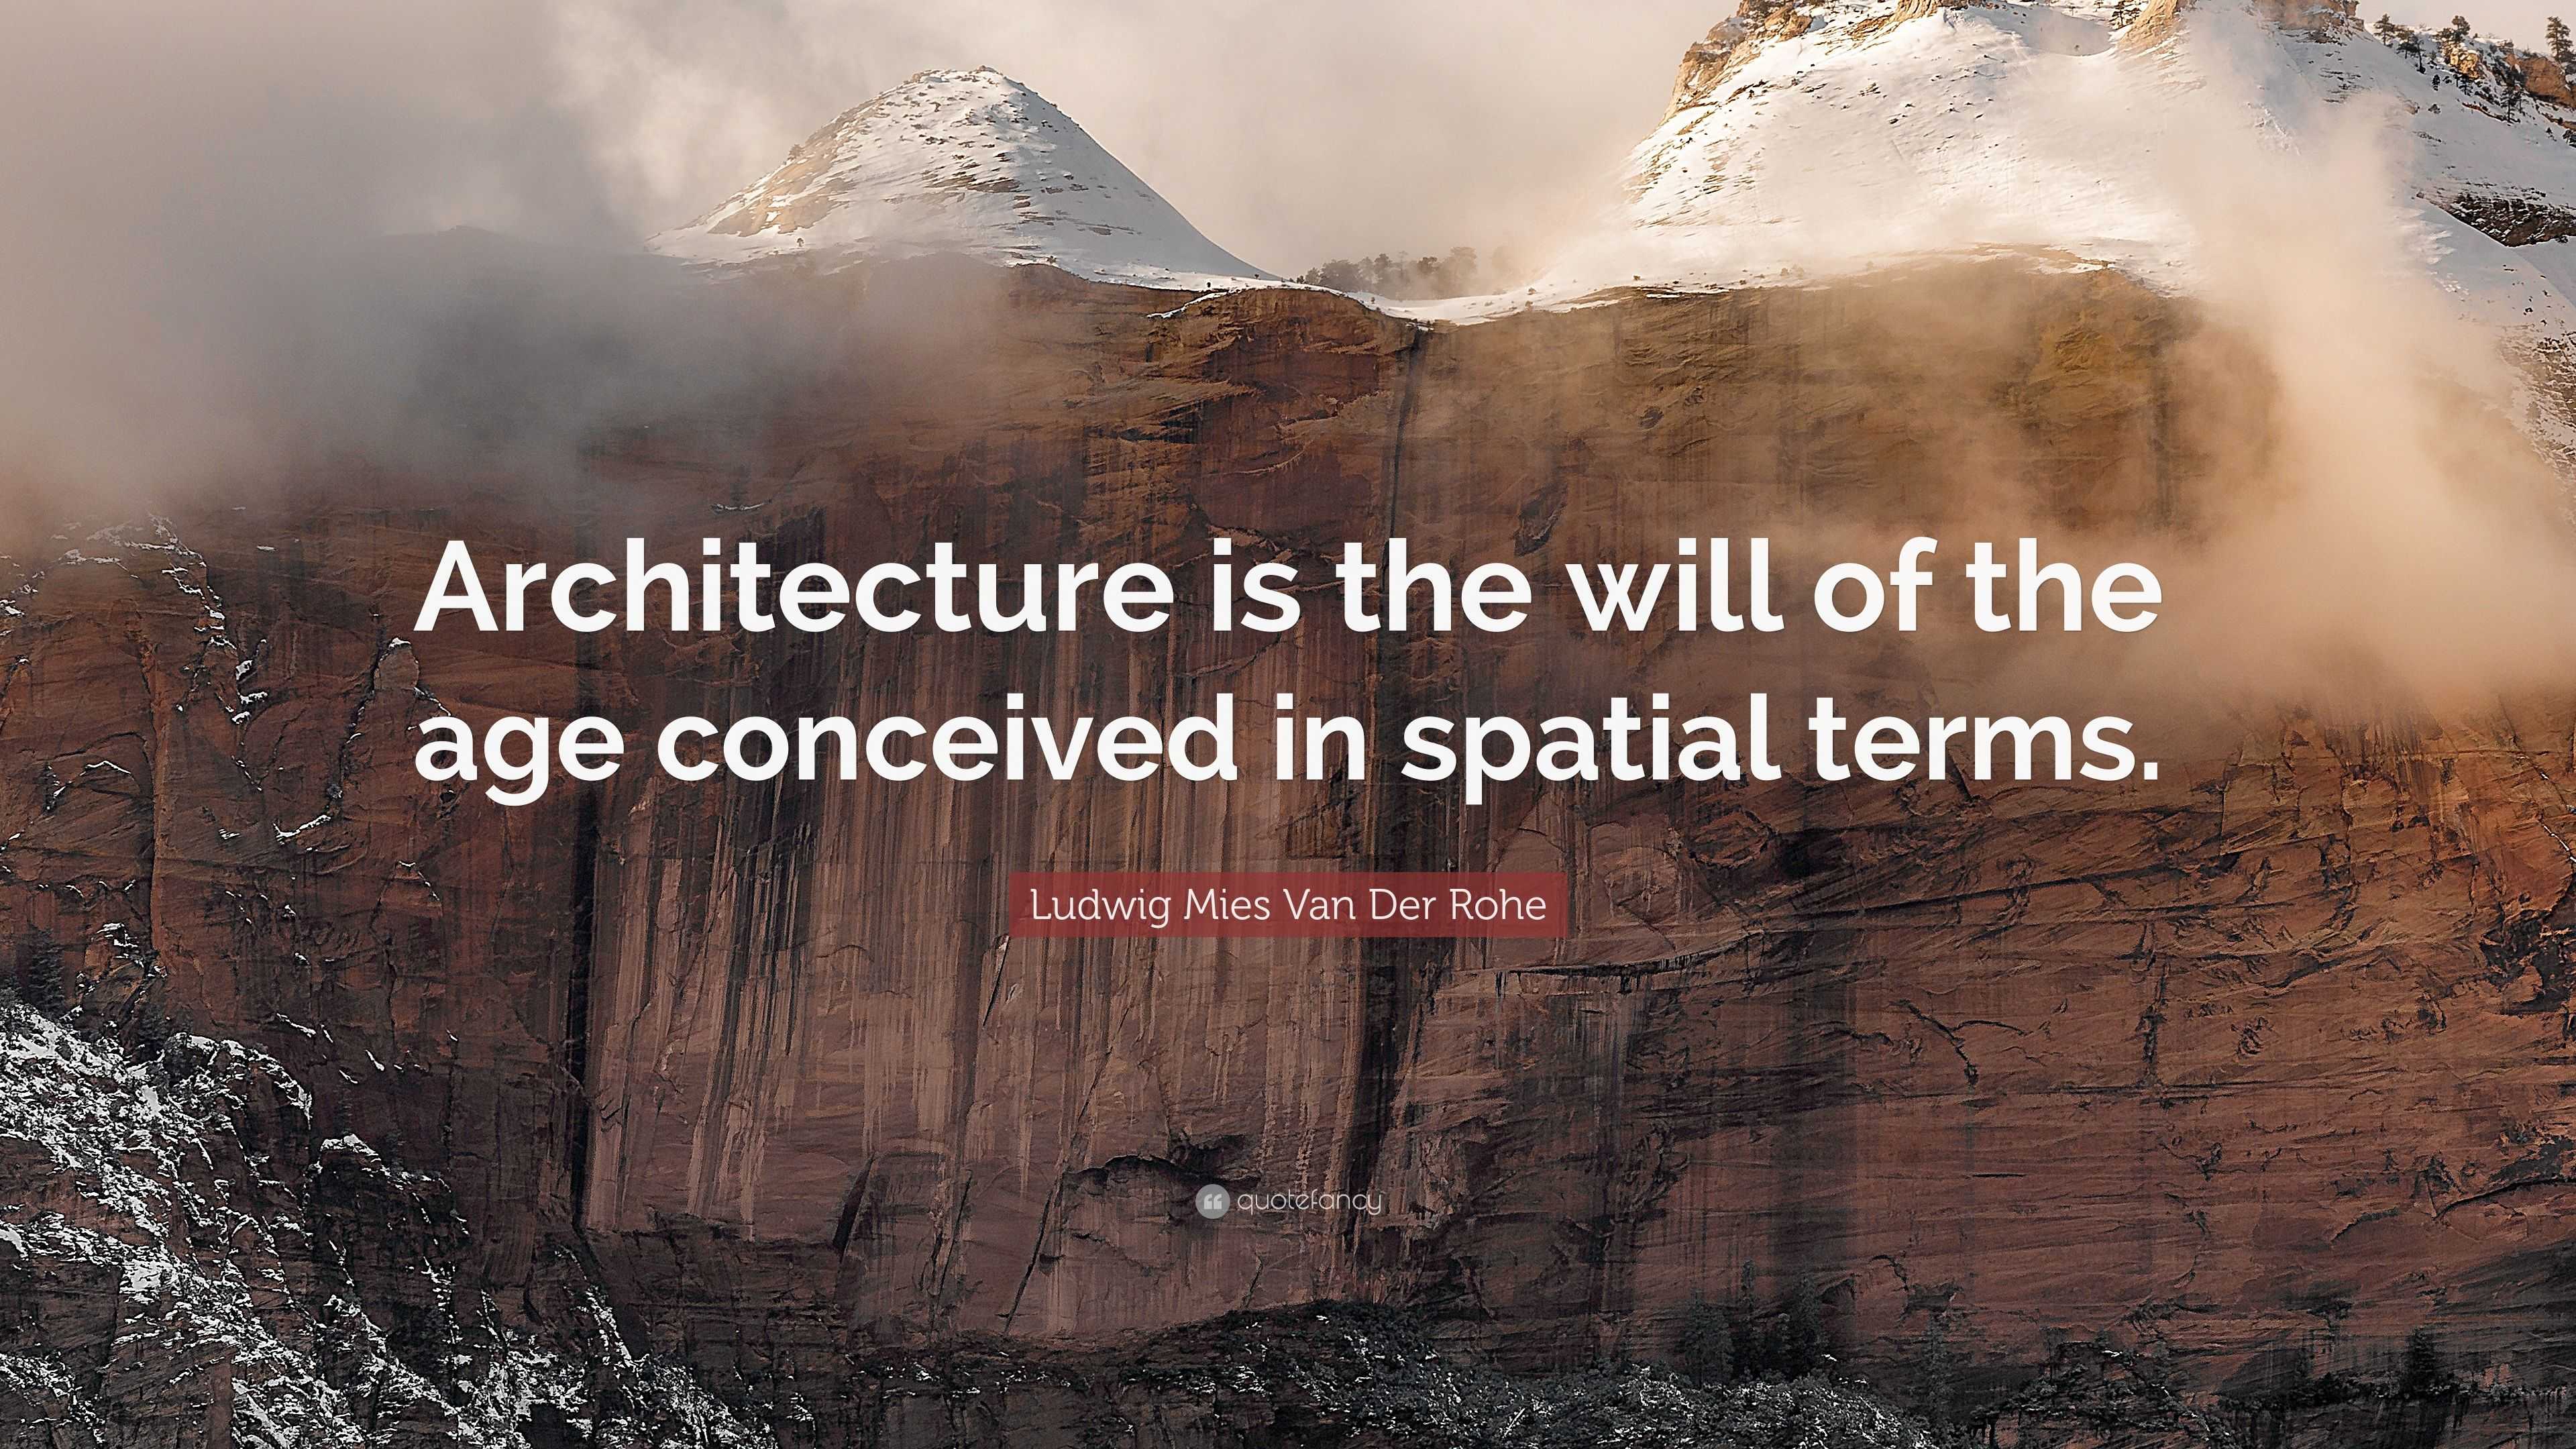 Ludwig Mies Van Der Rohe Quote: “Architecture is the will of the age ...